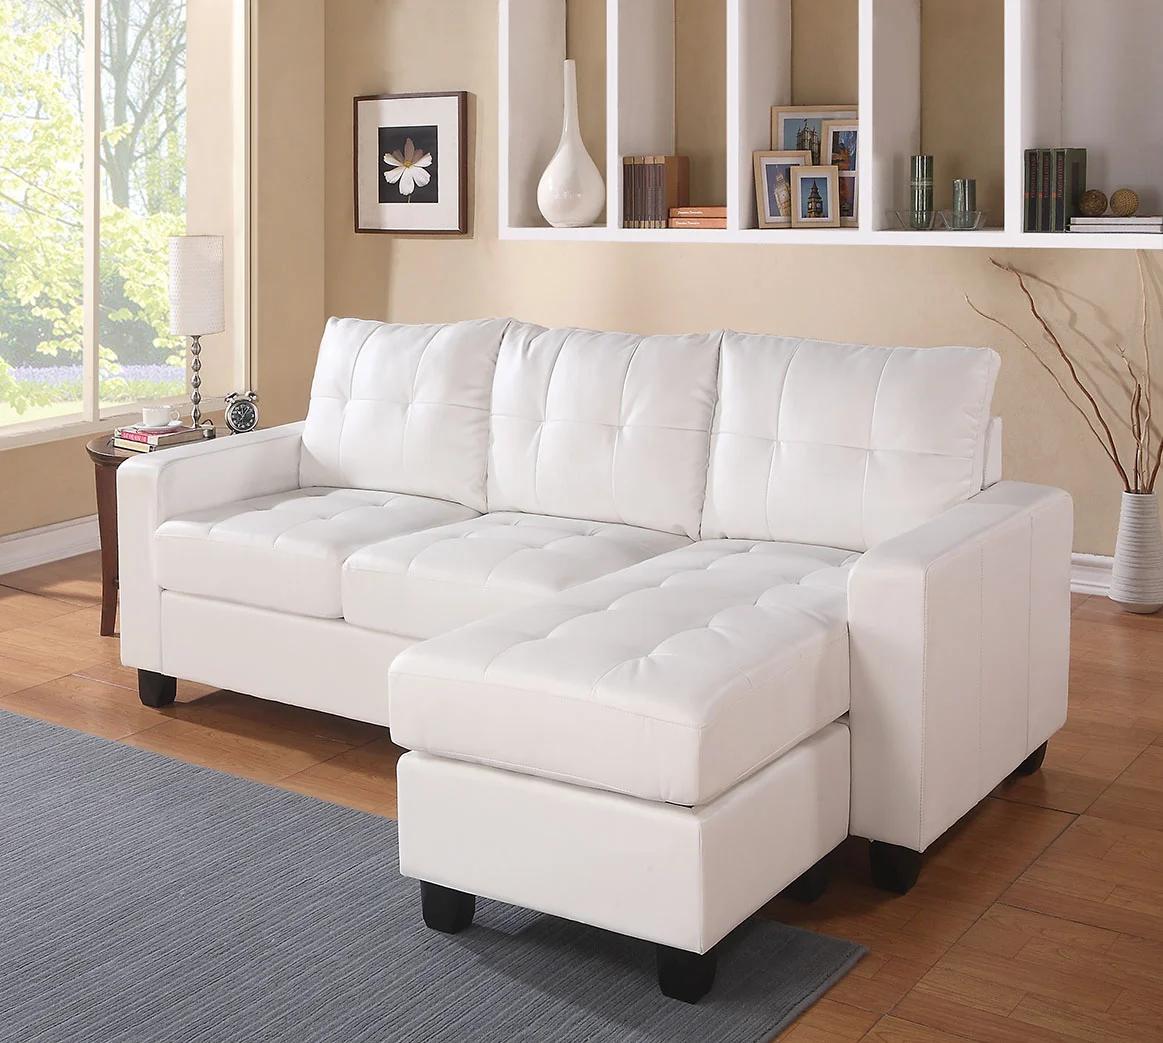 

    
Contemporary White Bonded Leather Match Sectional Sofa & Ottoman by Acme Lyssa 51210-3pcs
